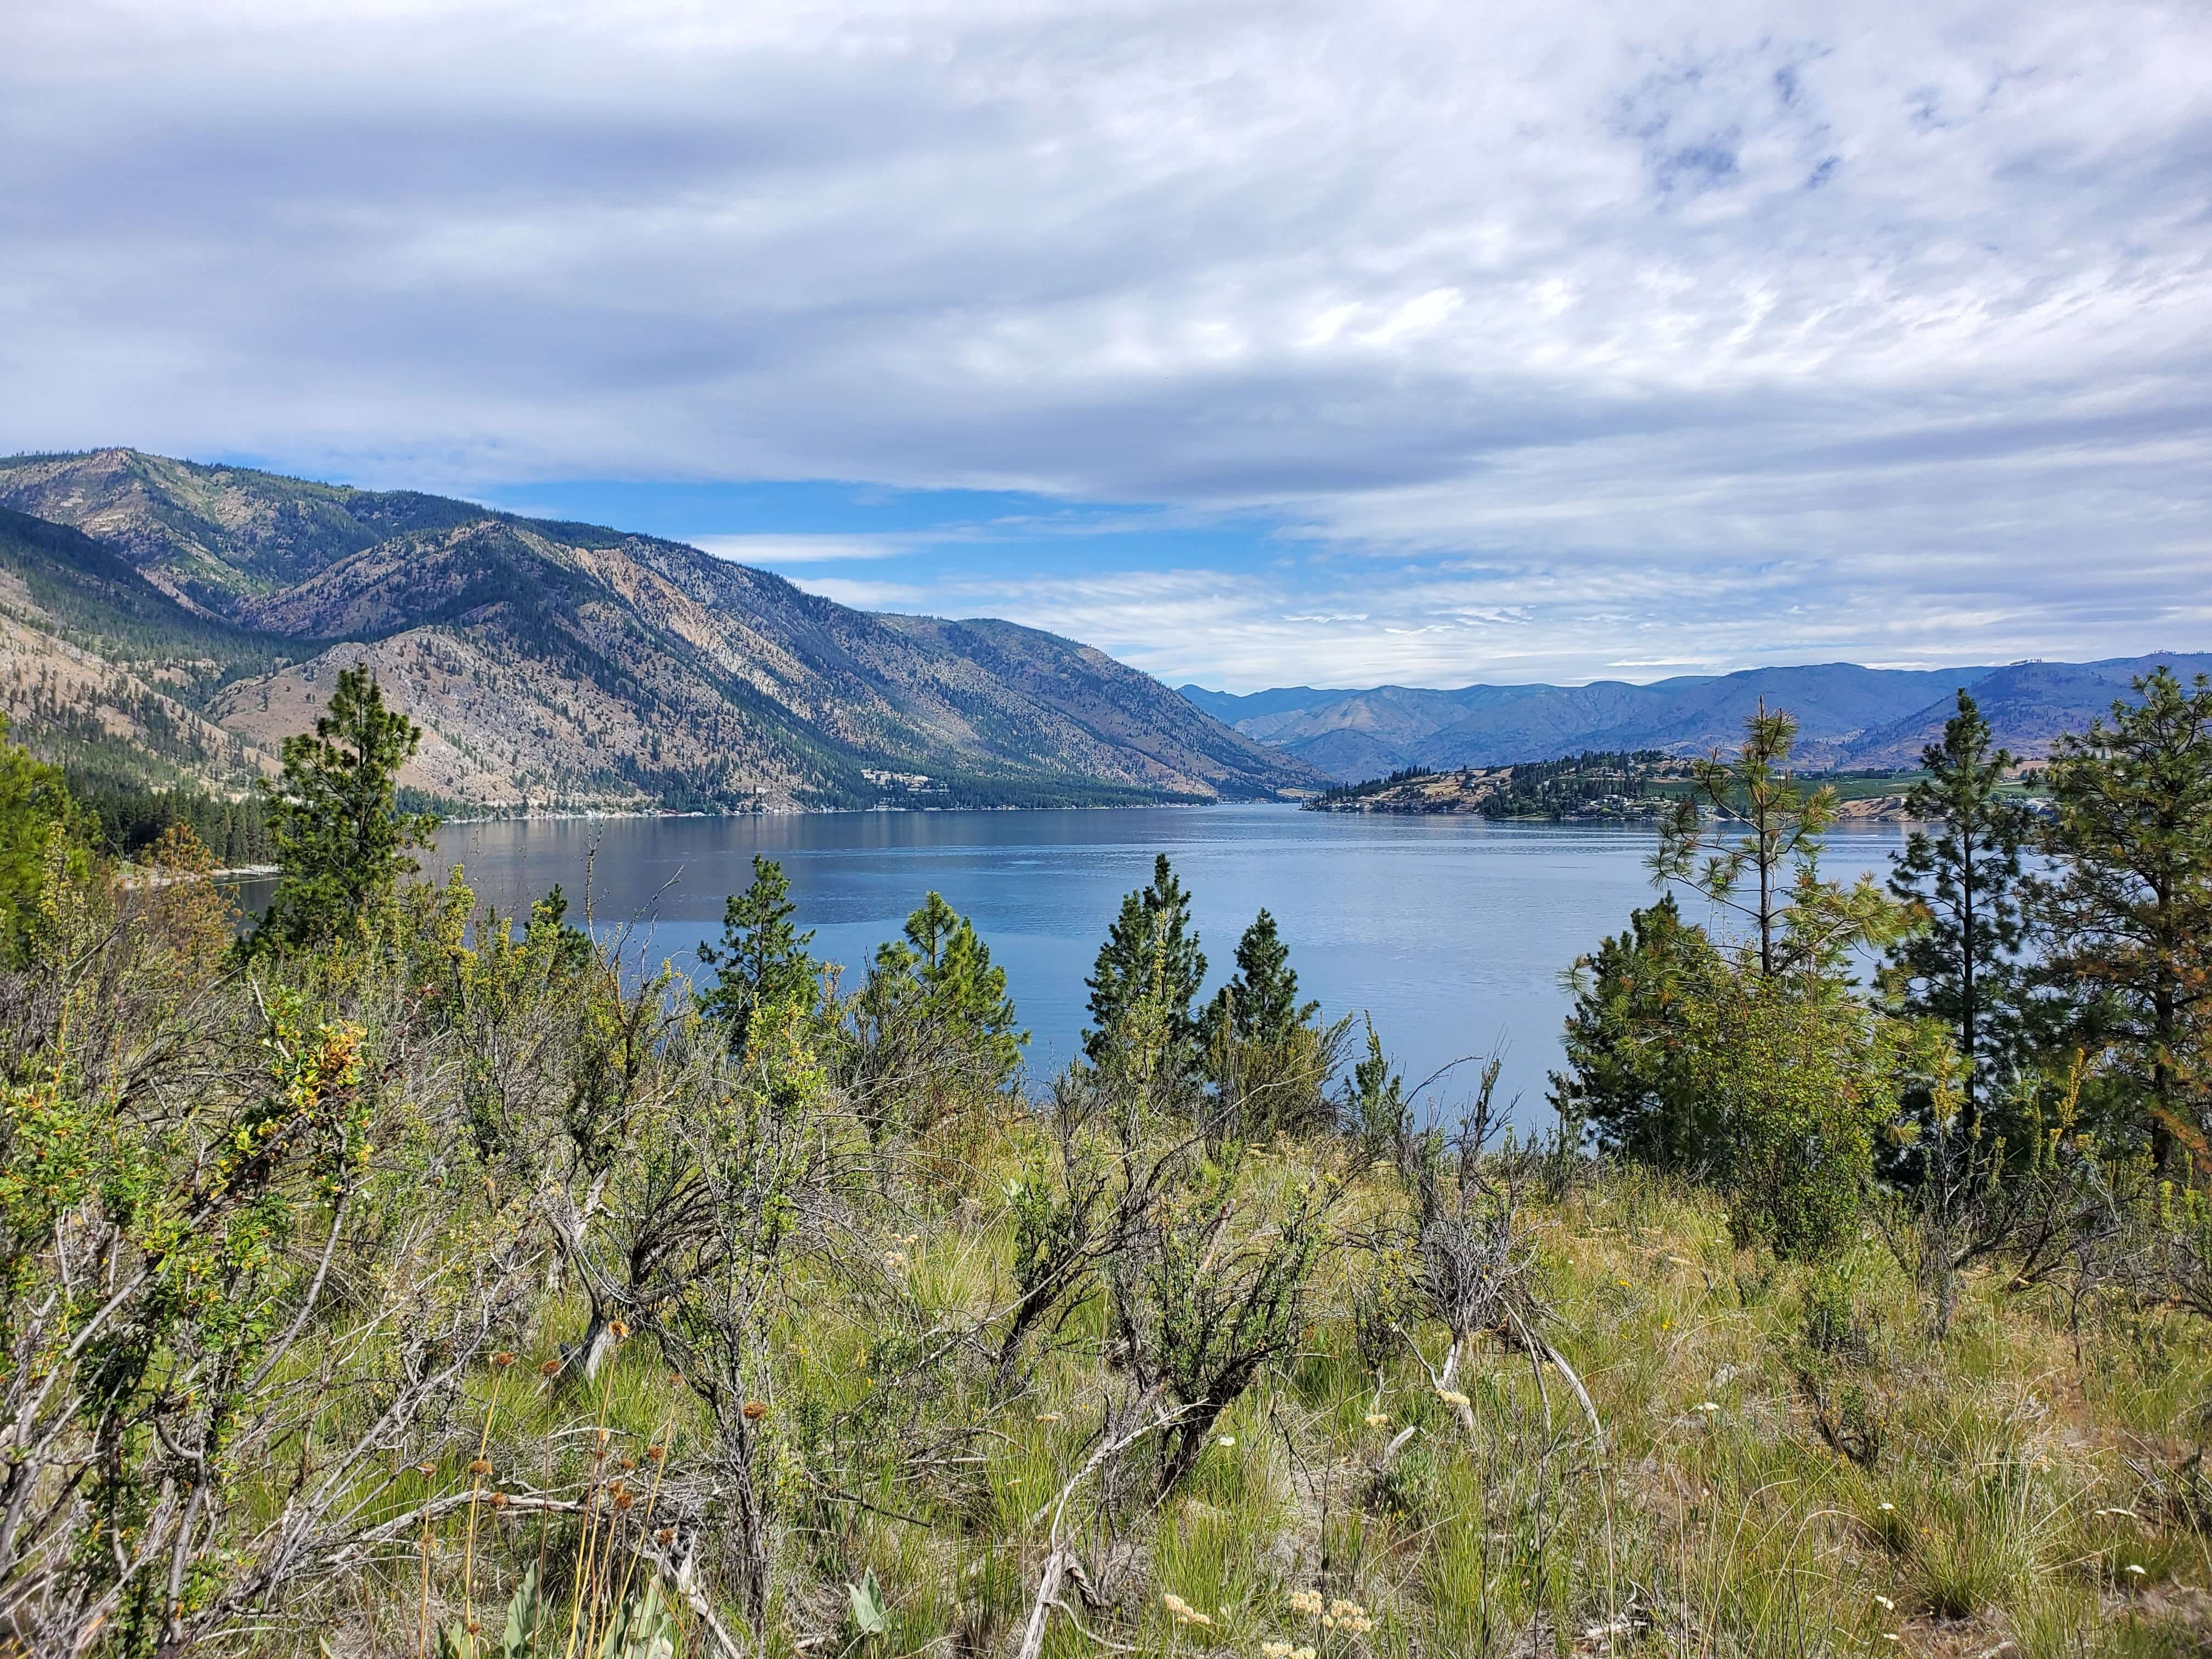 Things to do at Lake Chelan: A Guide for Outdoor Adventurers